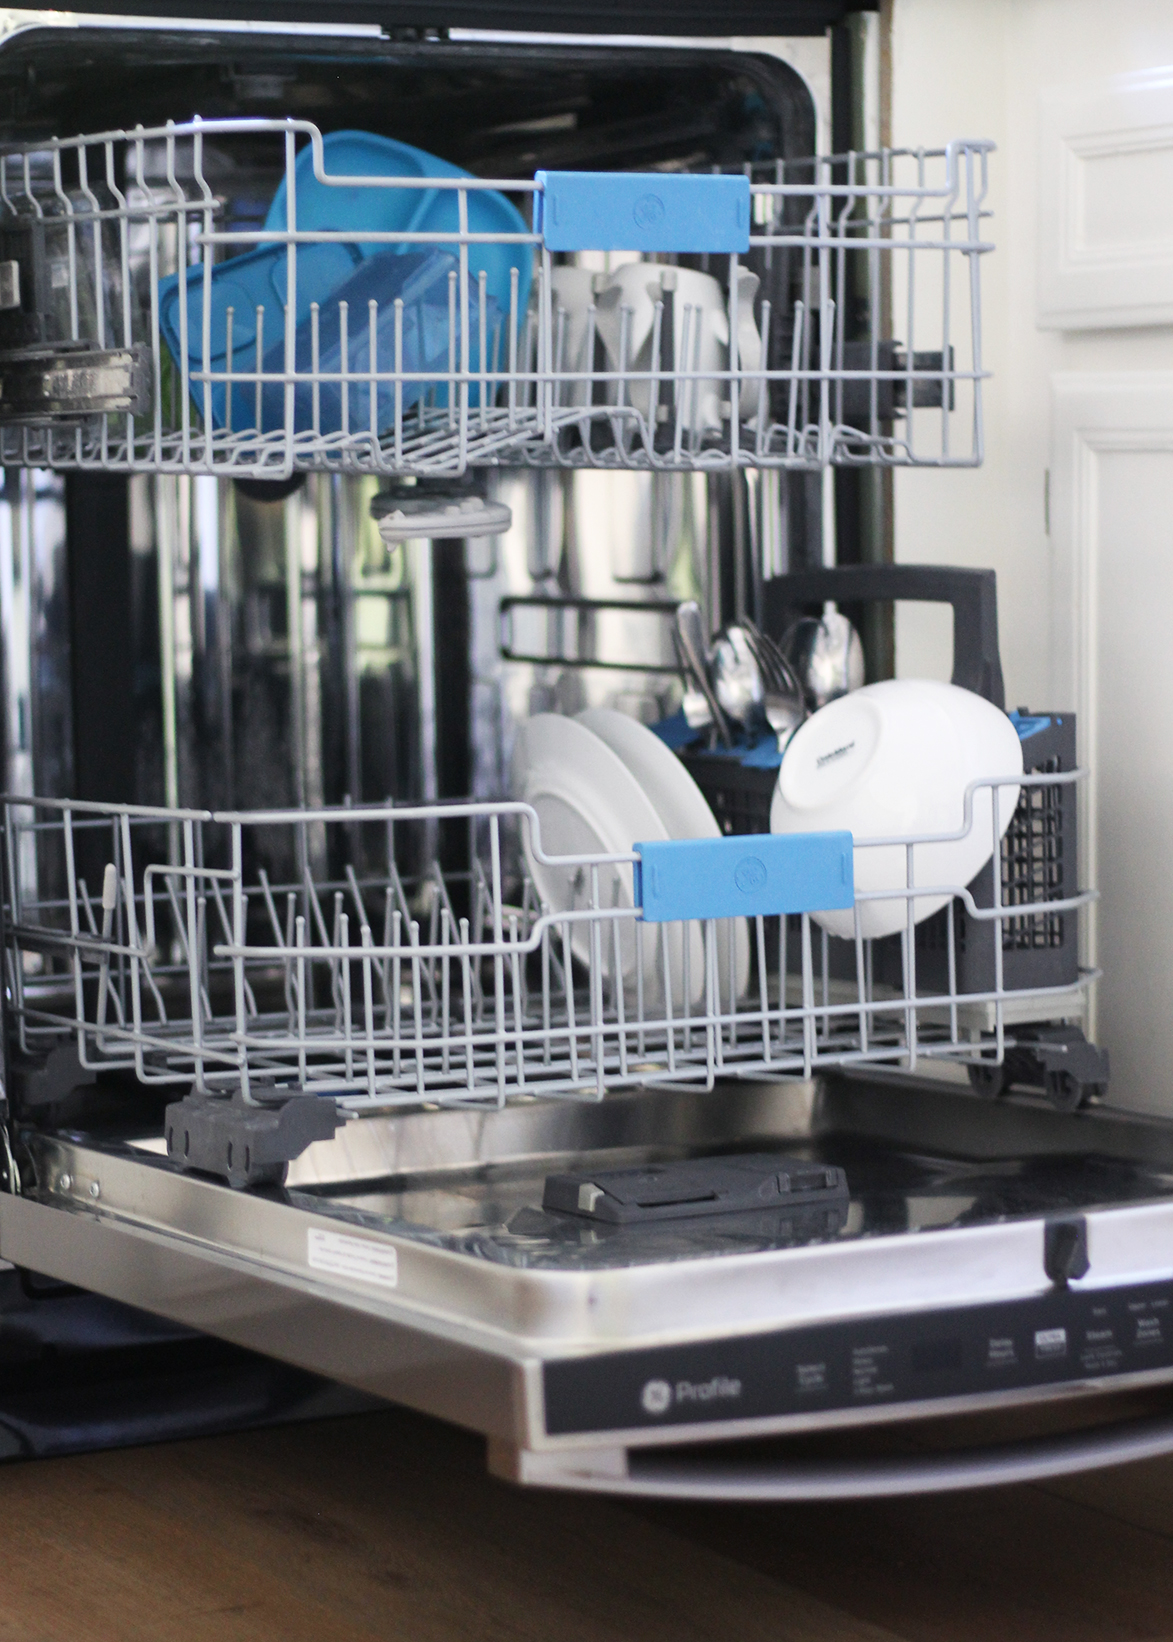 Important Tips for Loading and Unloading a Dishwasher